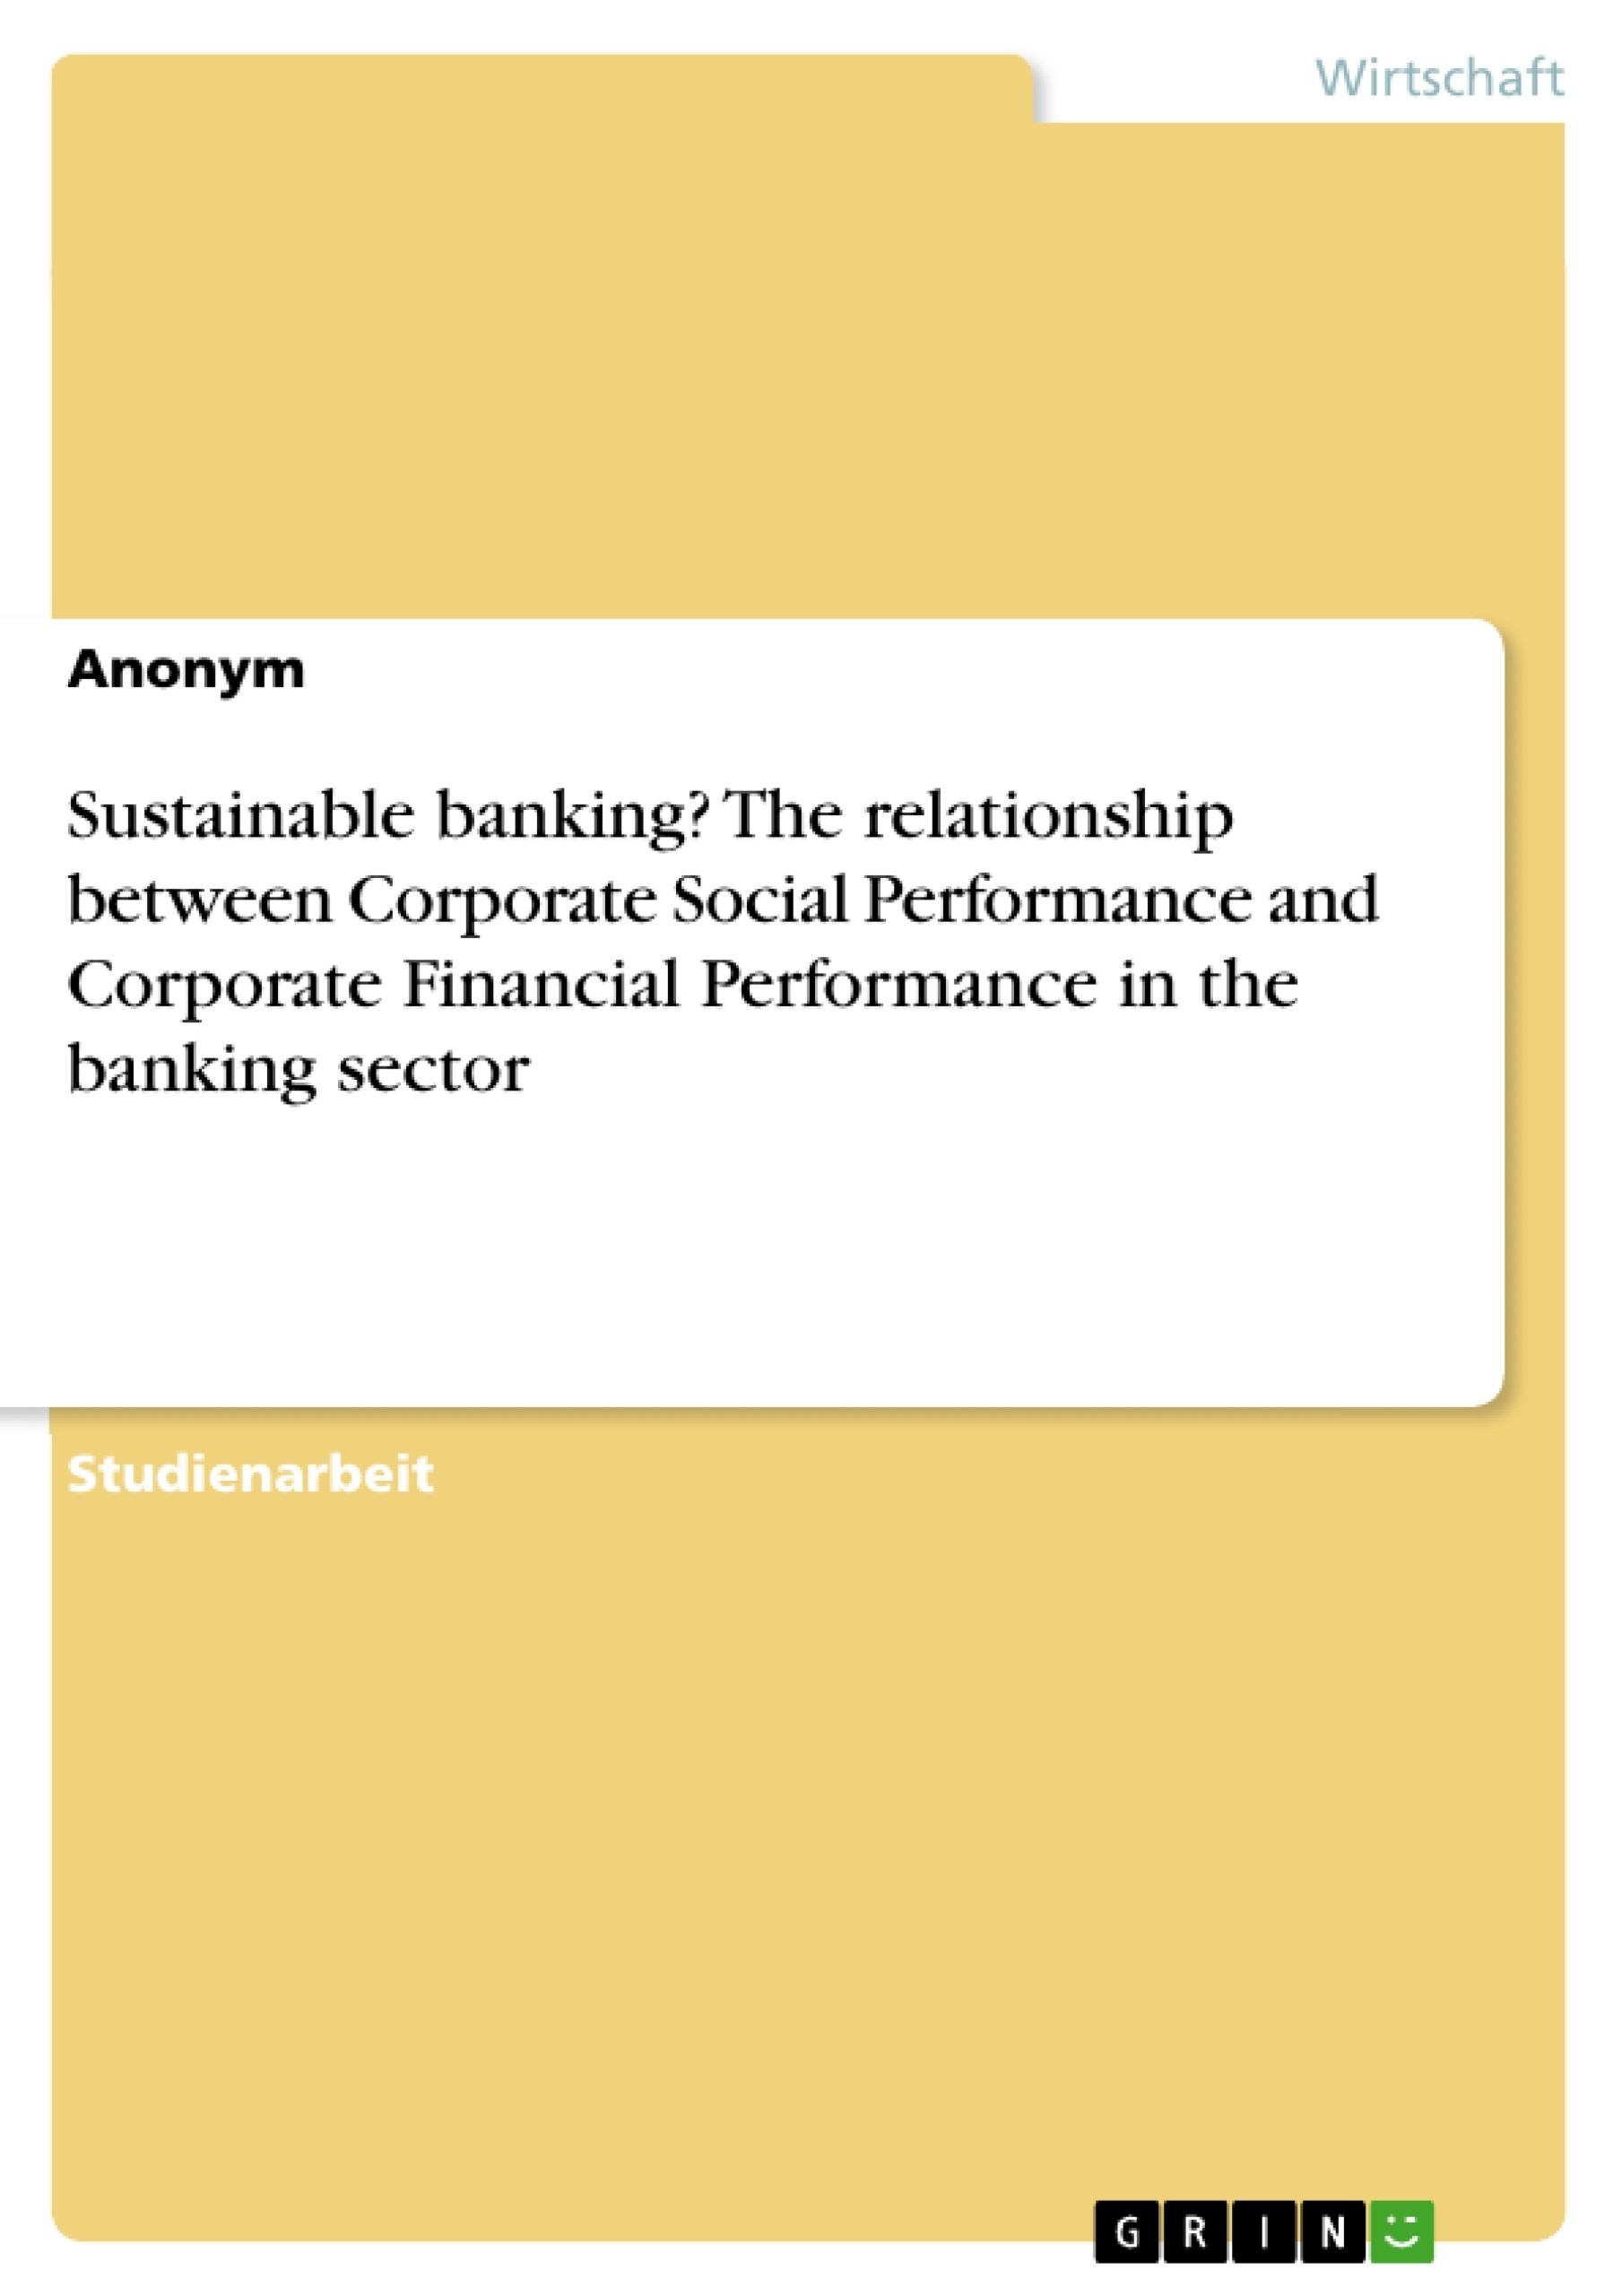 Titel: Sustainable banking? The relationship between Corporate Social Performance and Corporate Financial Performance in the banking sector